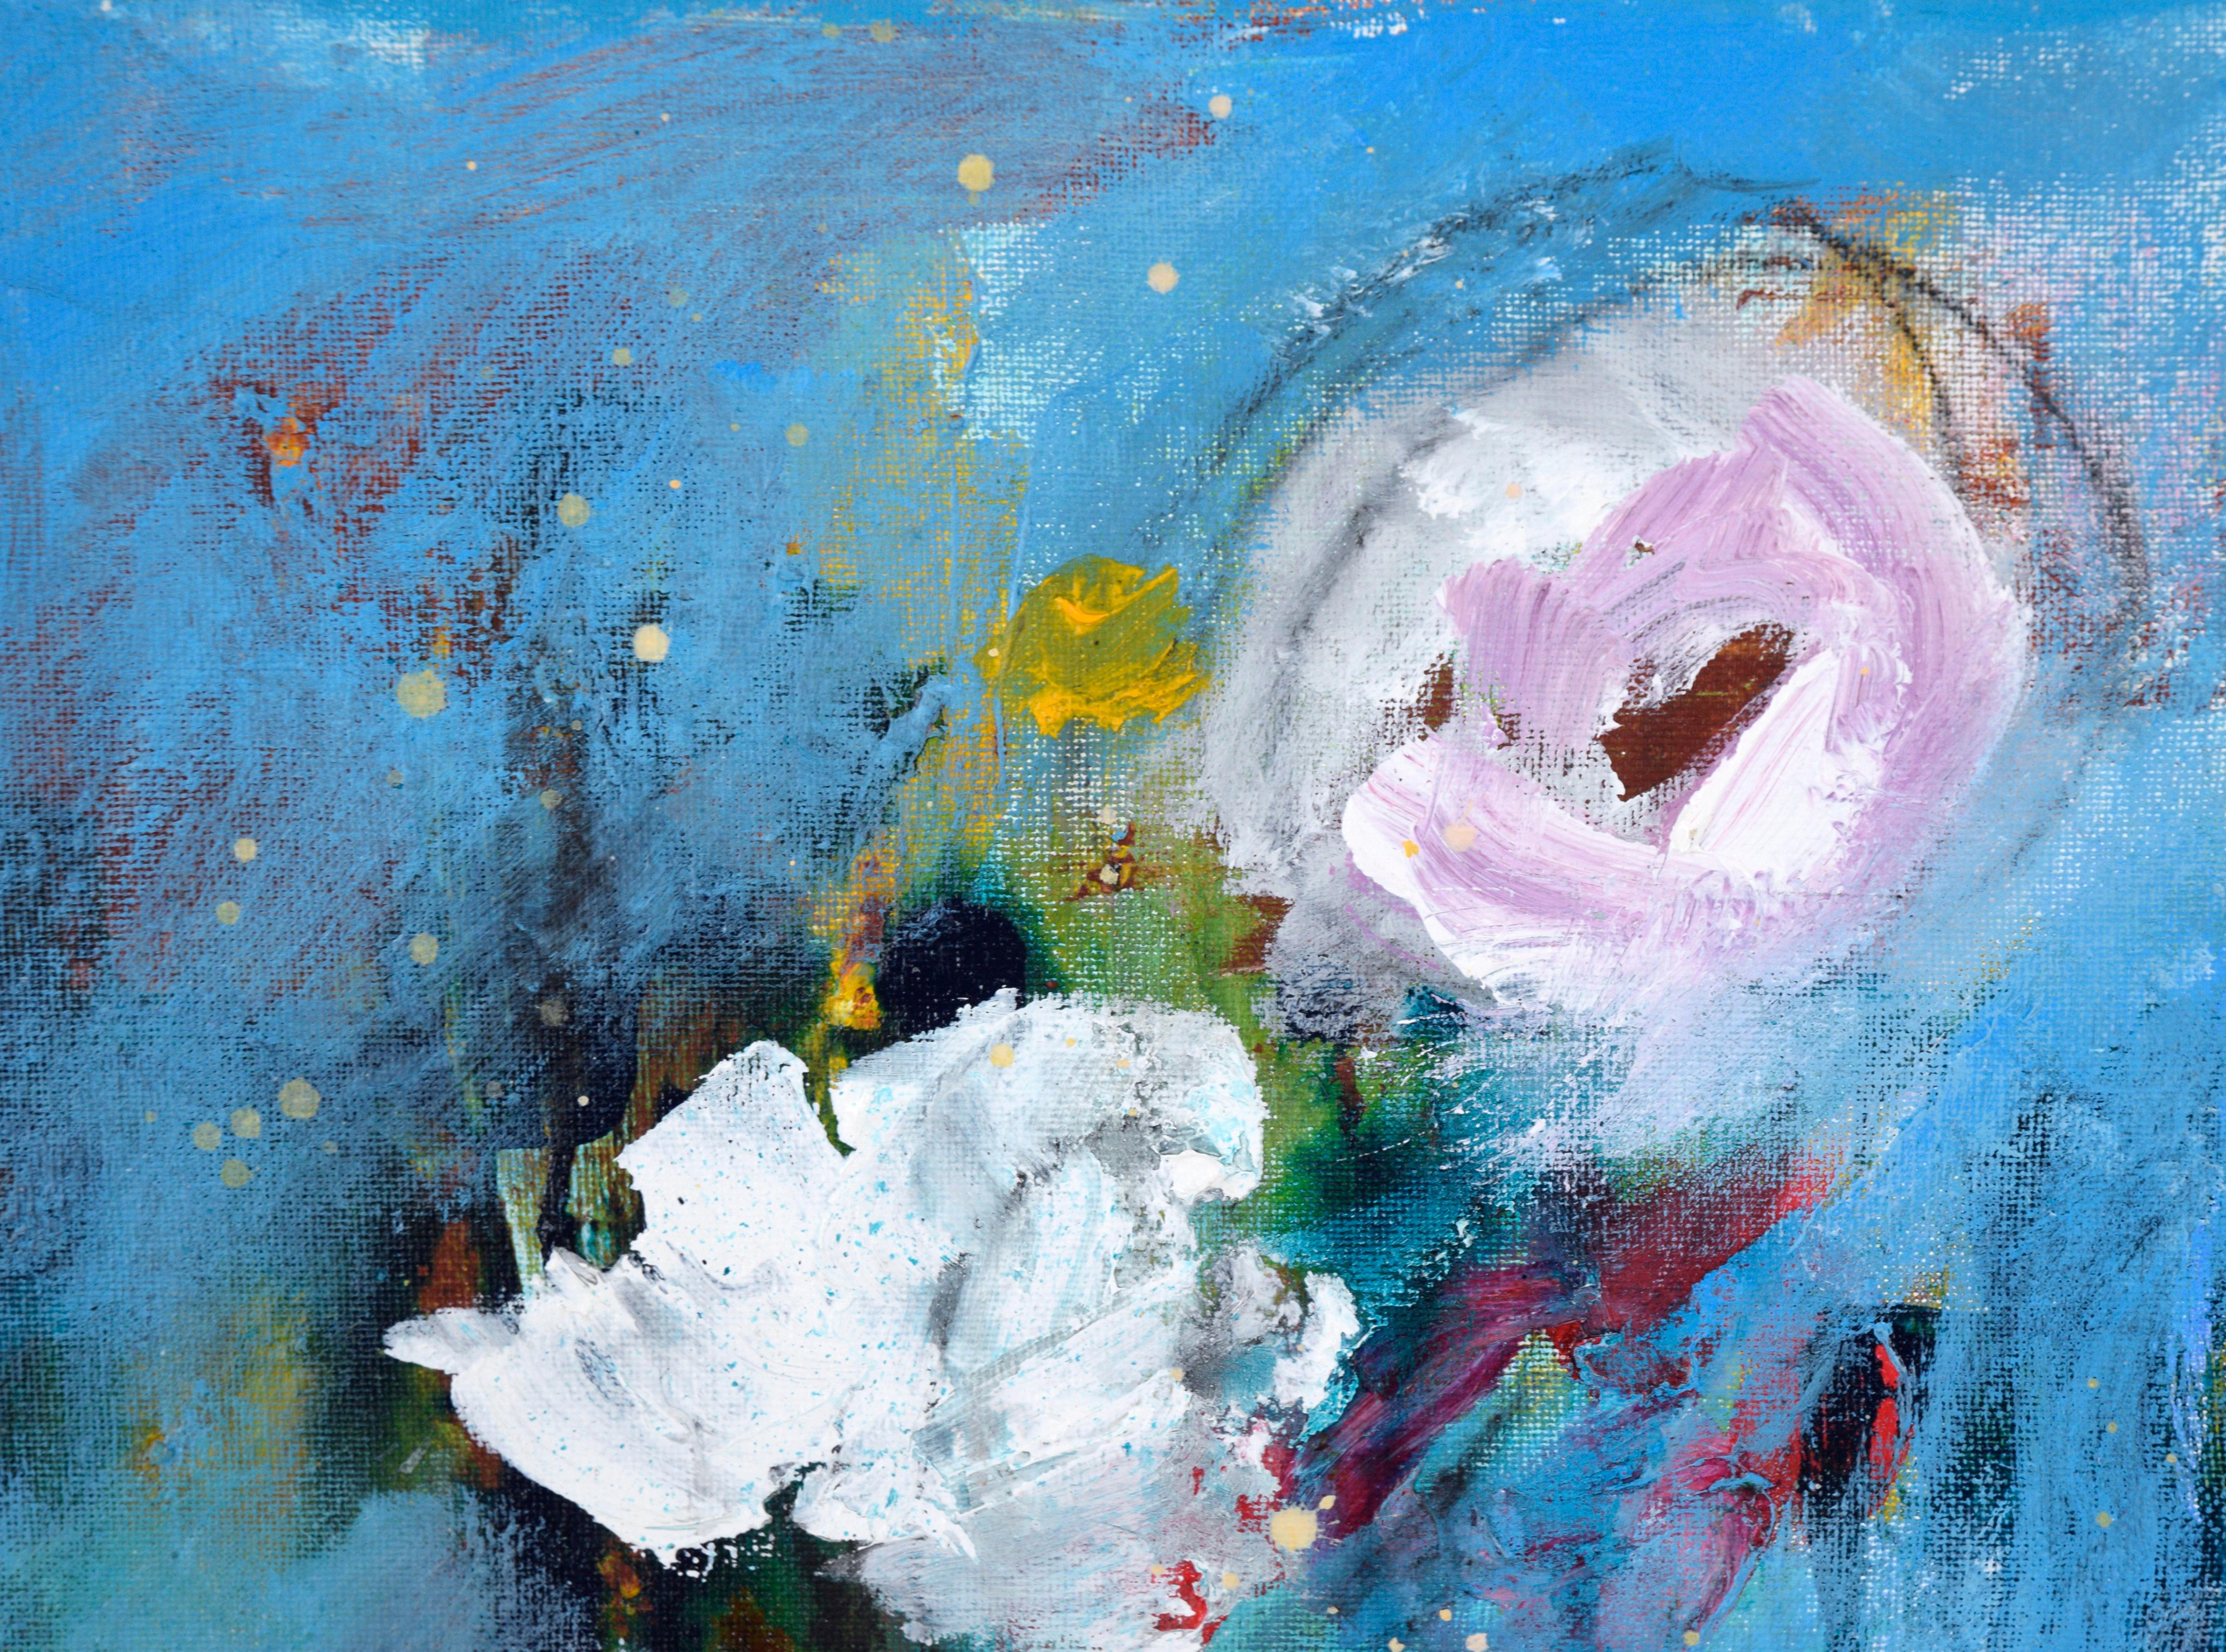 Abstract Expressionist Still Life with White Flowers - Abstract Impressionist Painting by Ilana Ingber